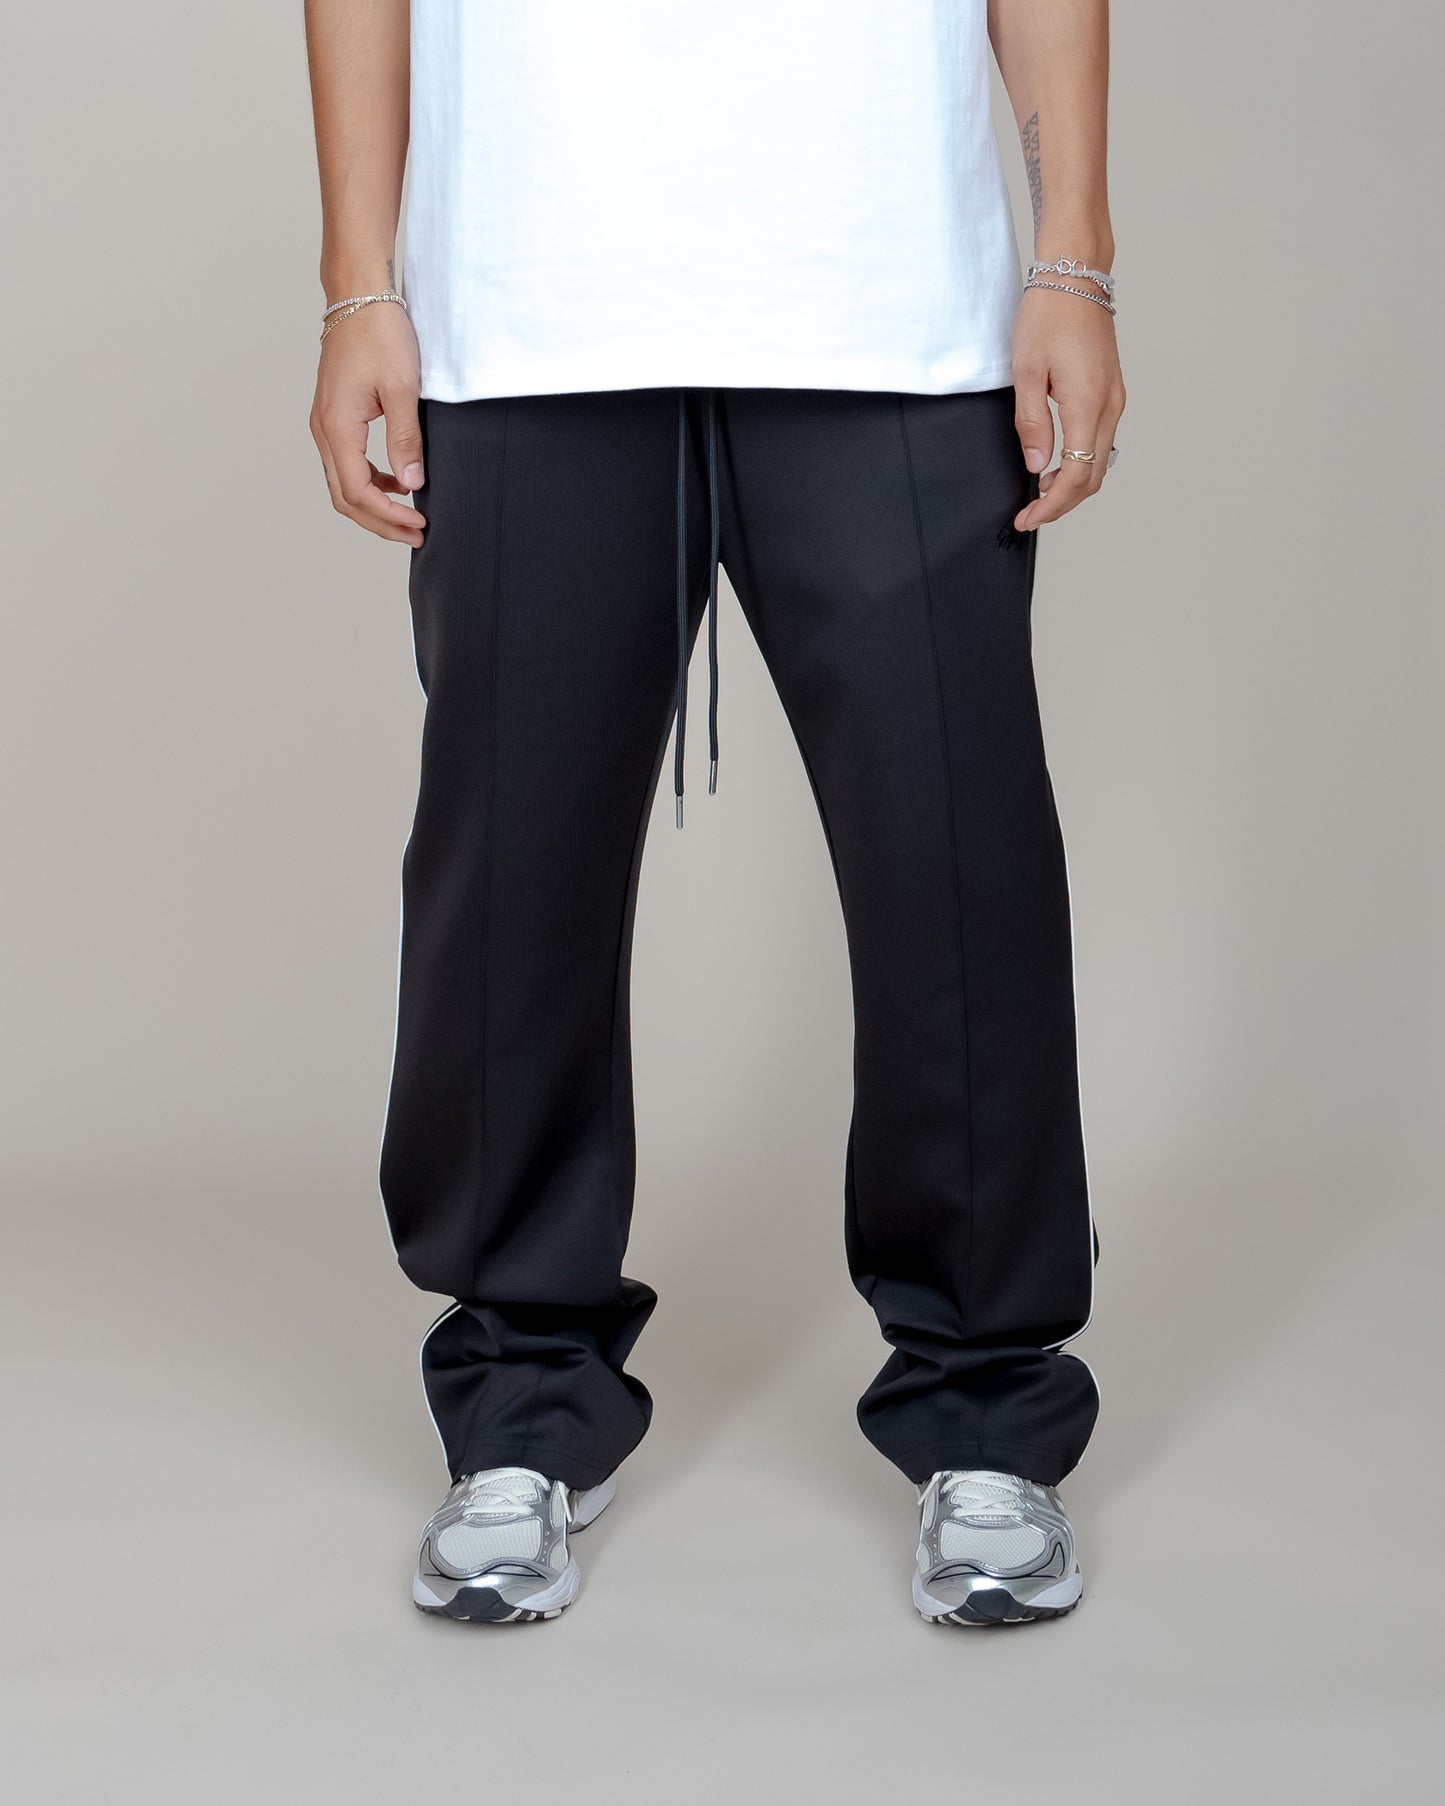 EPTM PERFECT PIPING TRACK PANTS-BLACK